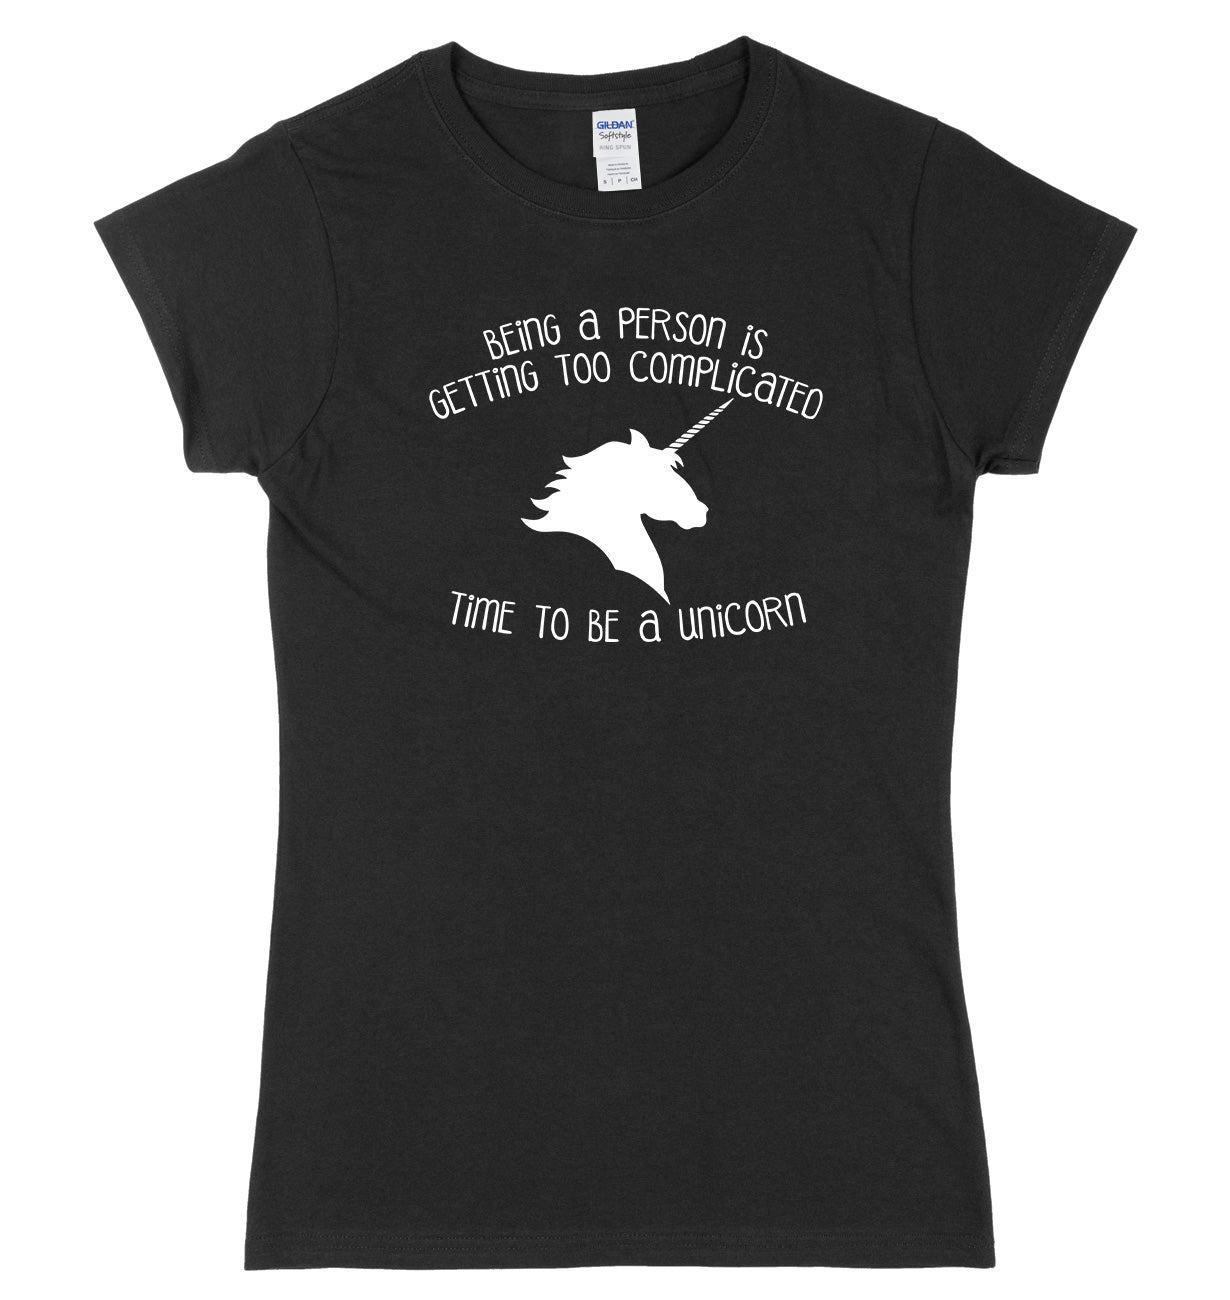 Being A Person Is Getting Too Complicated, Time To Be A Unicorn Womens Ladies Slim Fit T-Shirt